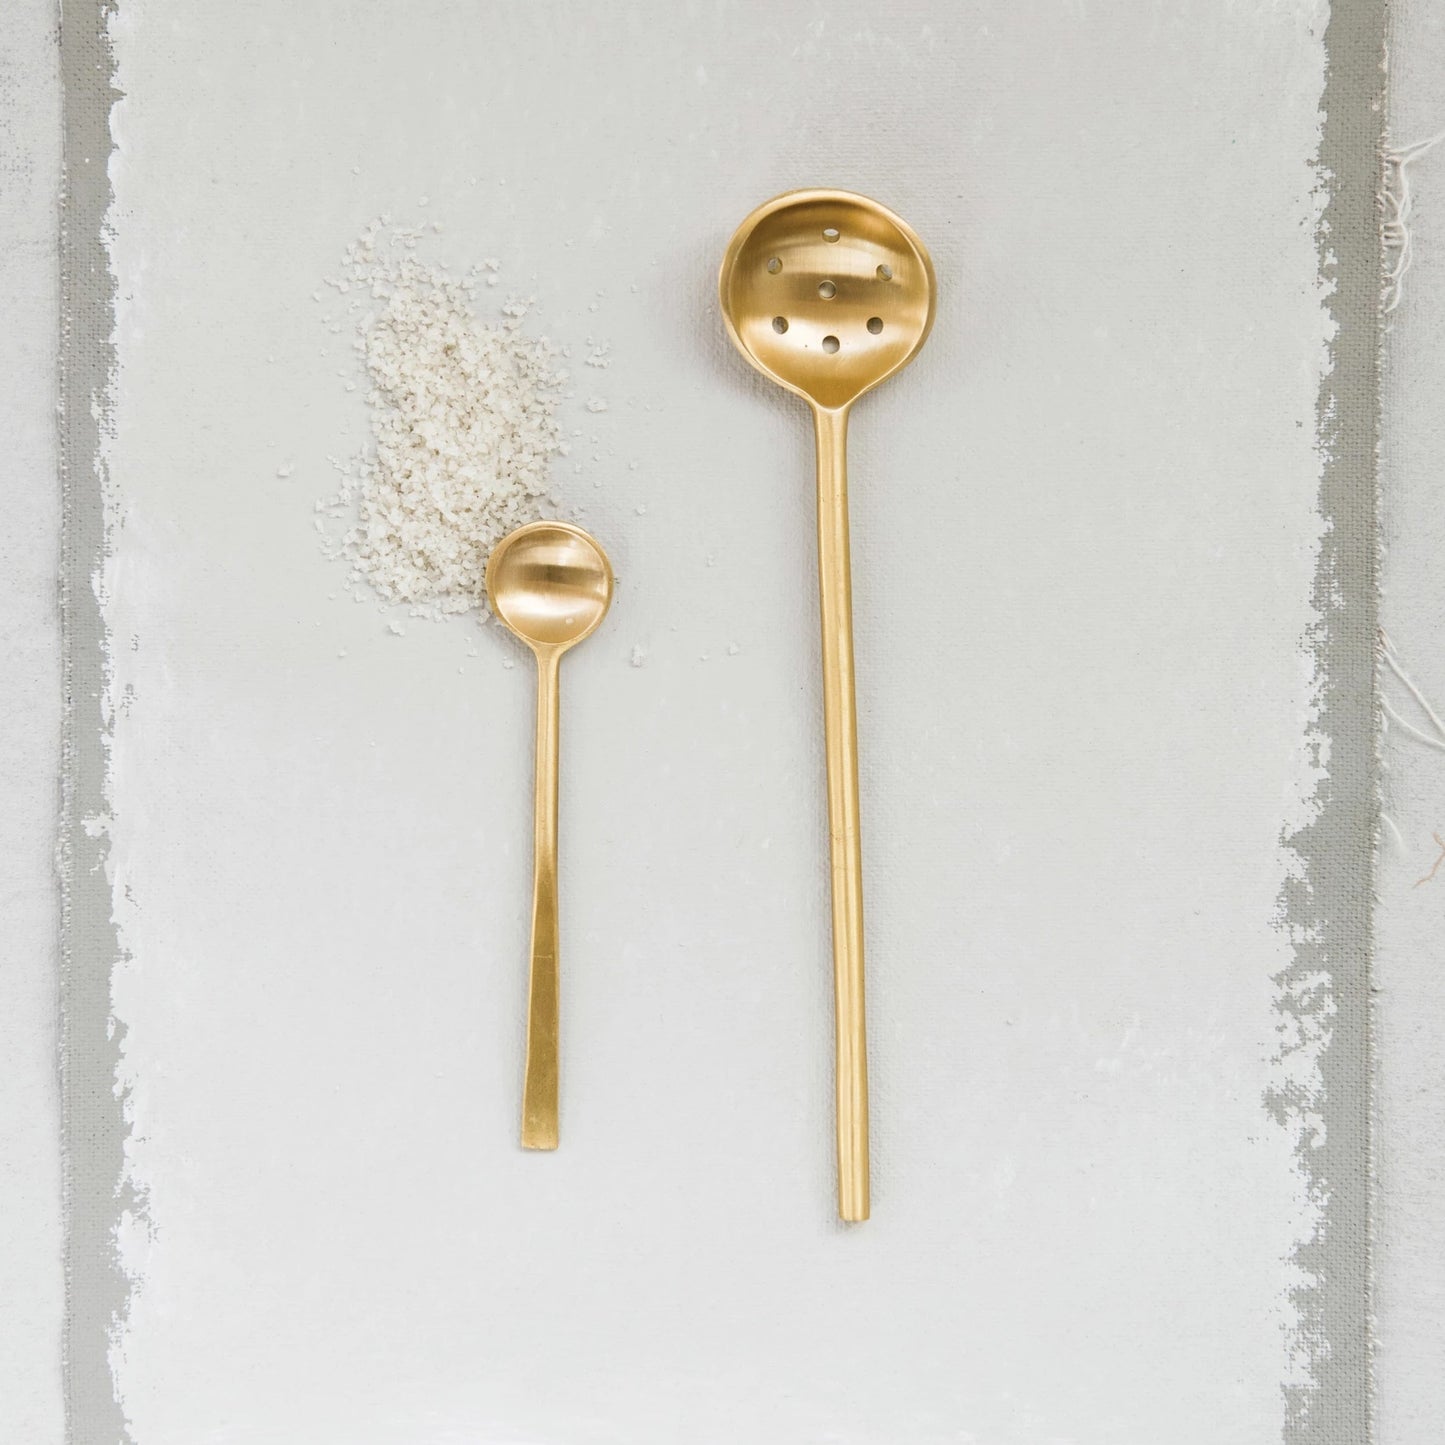 SMALL BRASS SLOTTED SPOON